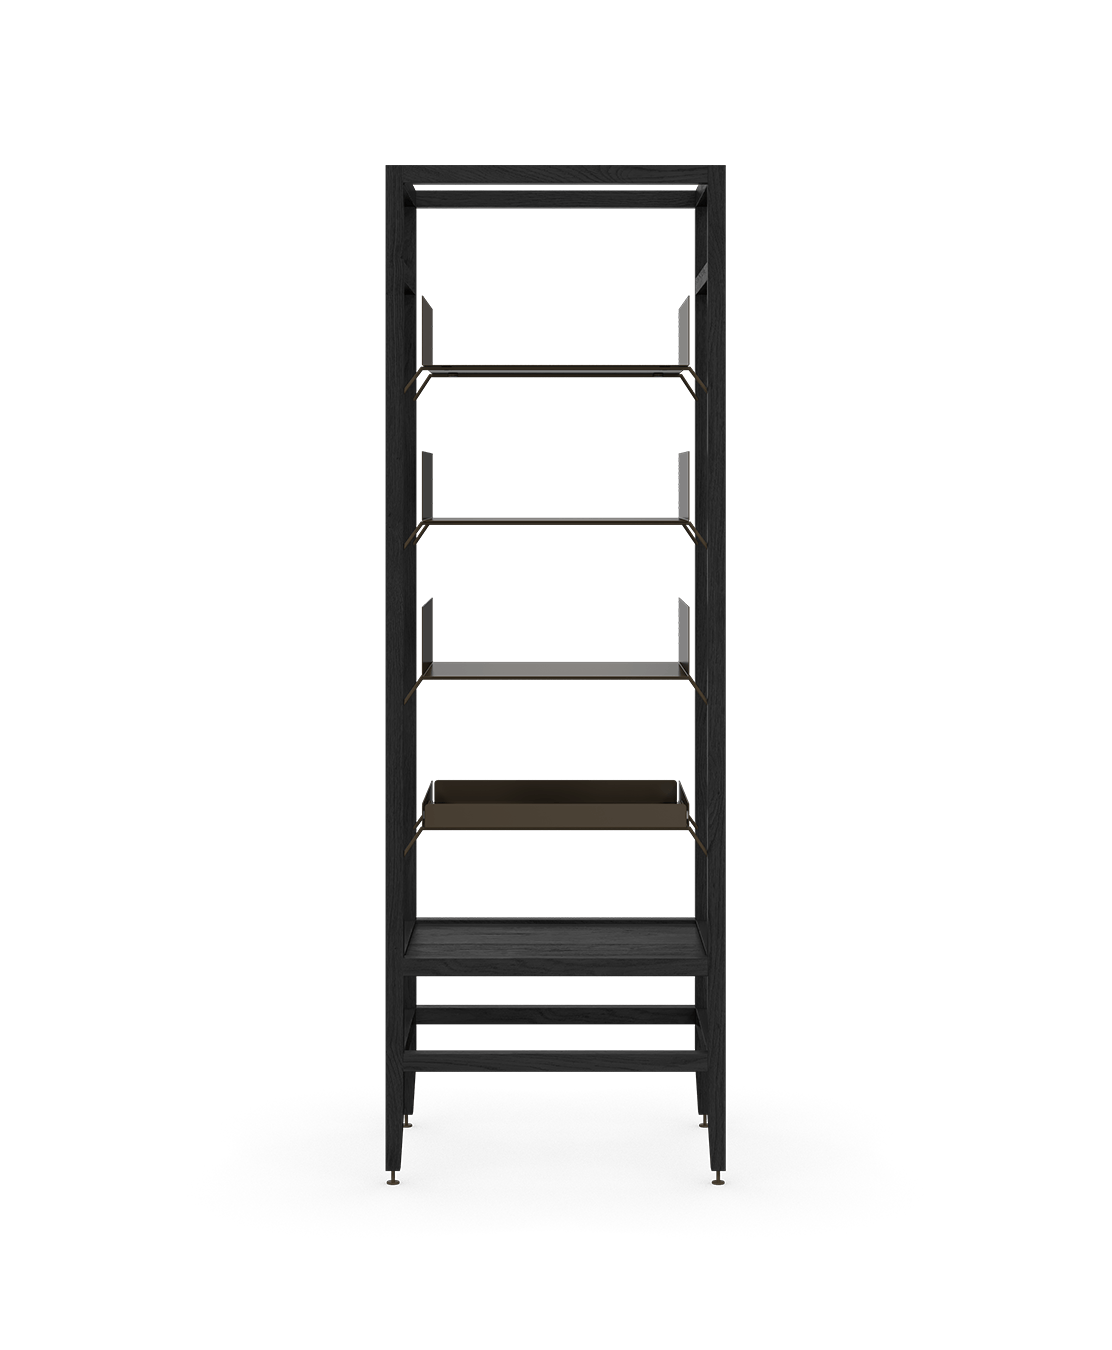 Coquo modular tall shelving unit in black stained oak and metal shelves. Perfect for the kitchen, dining or living room. 